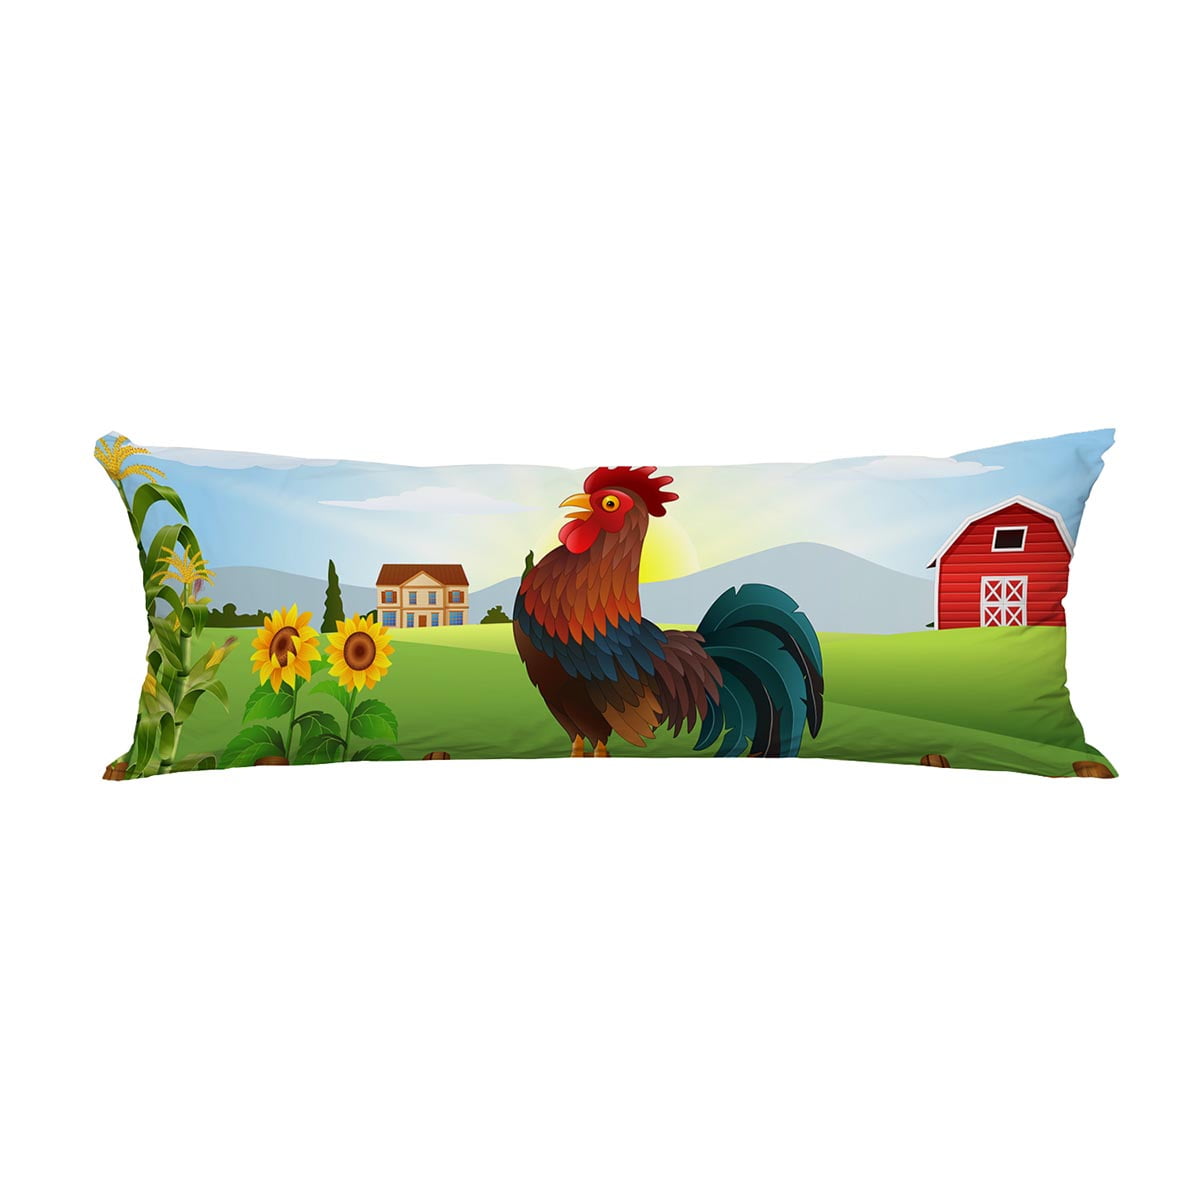 PKQWTM Cartoon Rooster Crowing At Farm Field Morning Sun Rising Long Body  Pillow Case Cover Pillow Cushion Size 20x60 Inches 